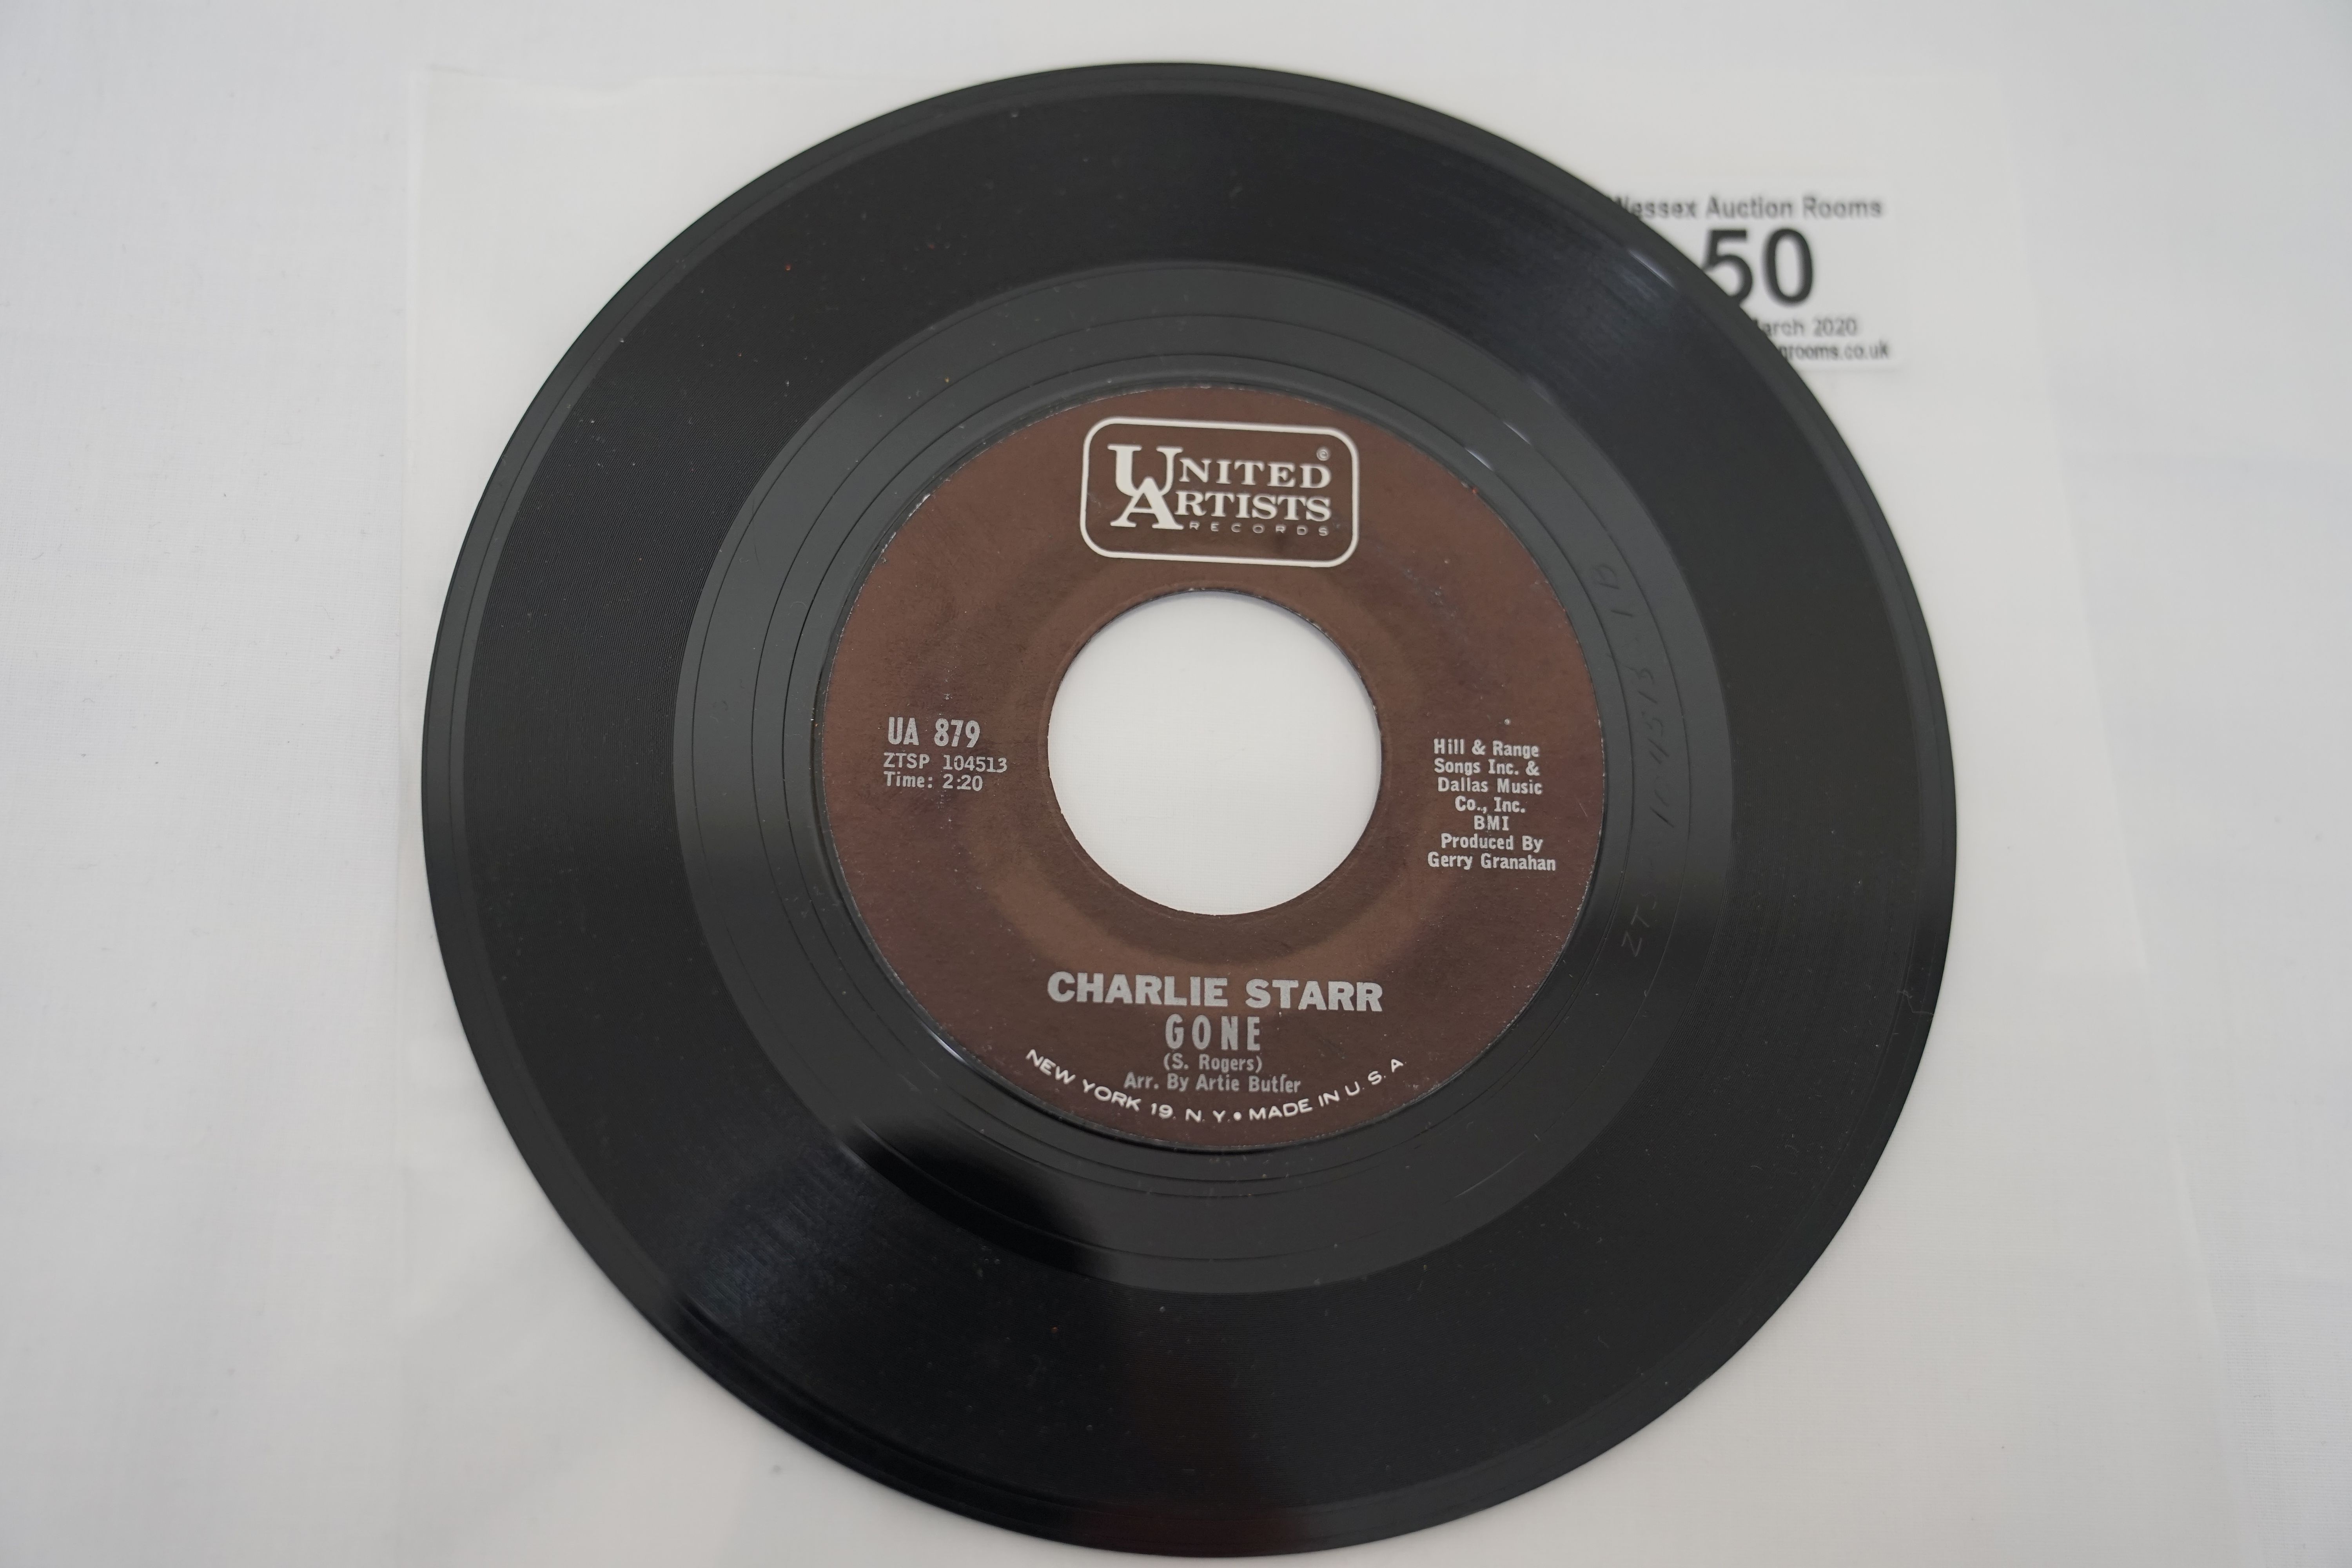 Vinyl - Charlie Starr - Number One (United Artists Records UA 879) NM archive. An original US 1st - Image 4 of 5